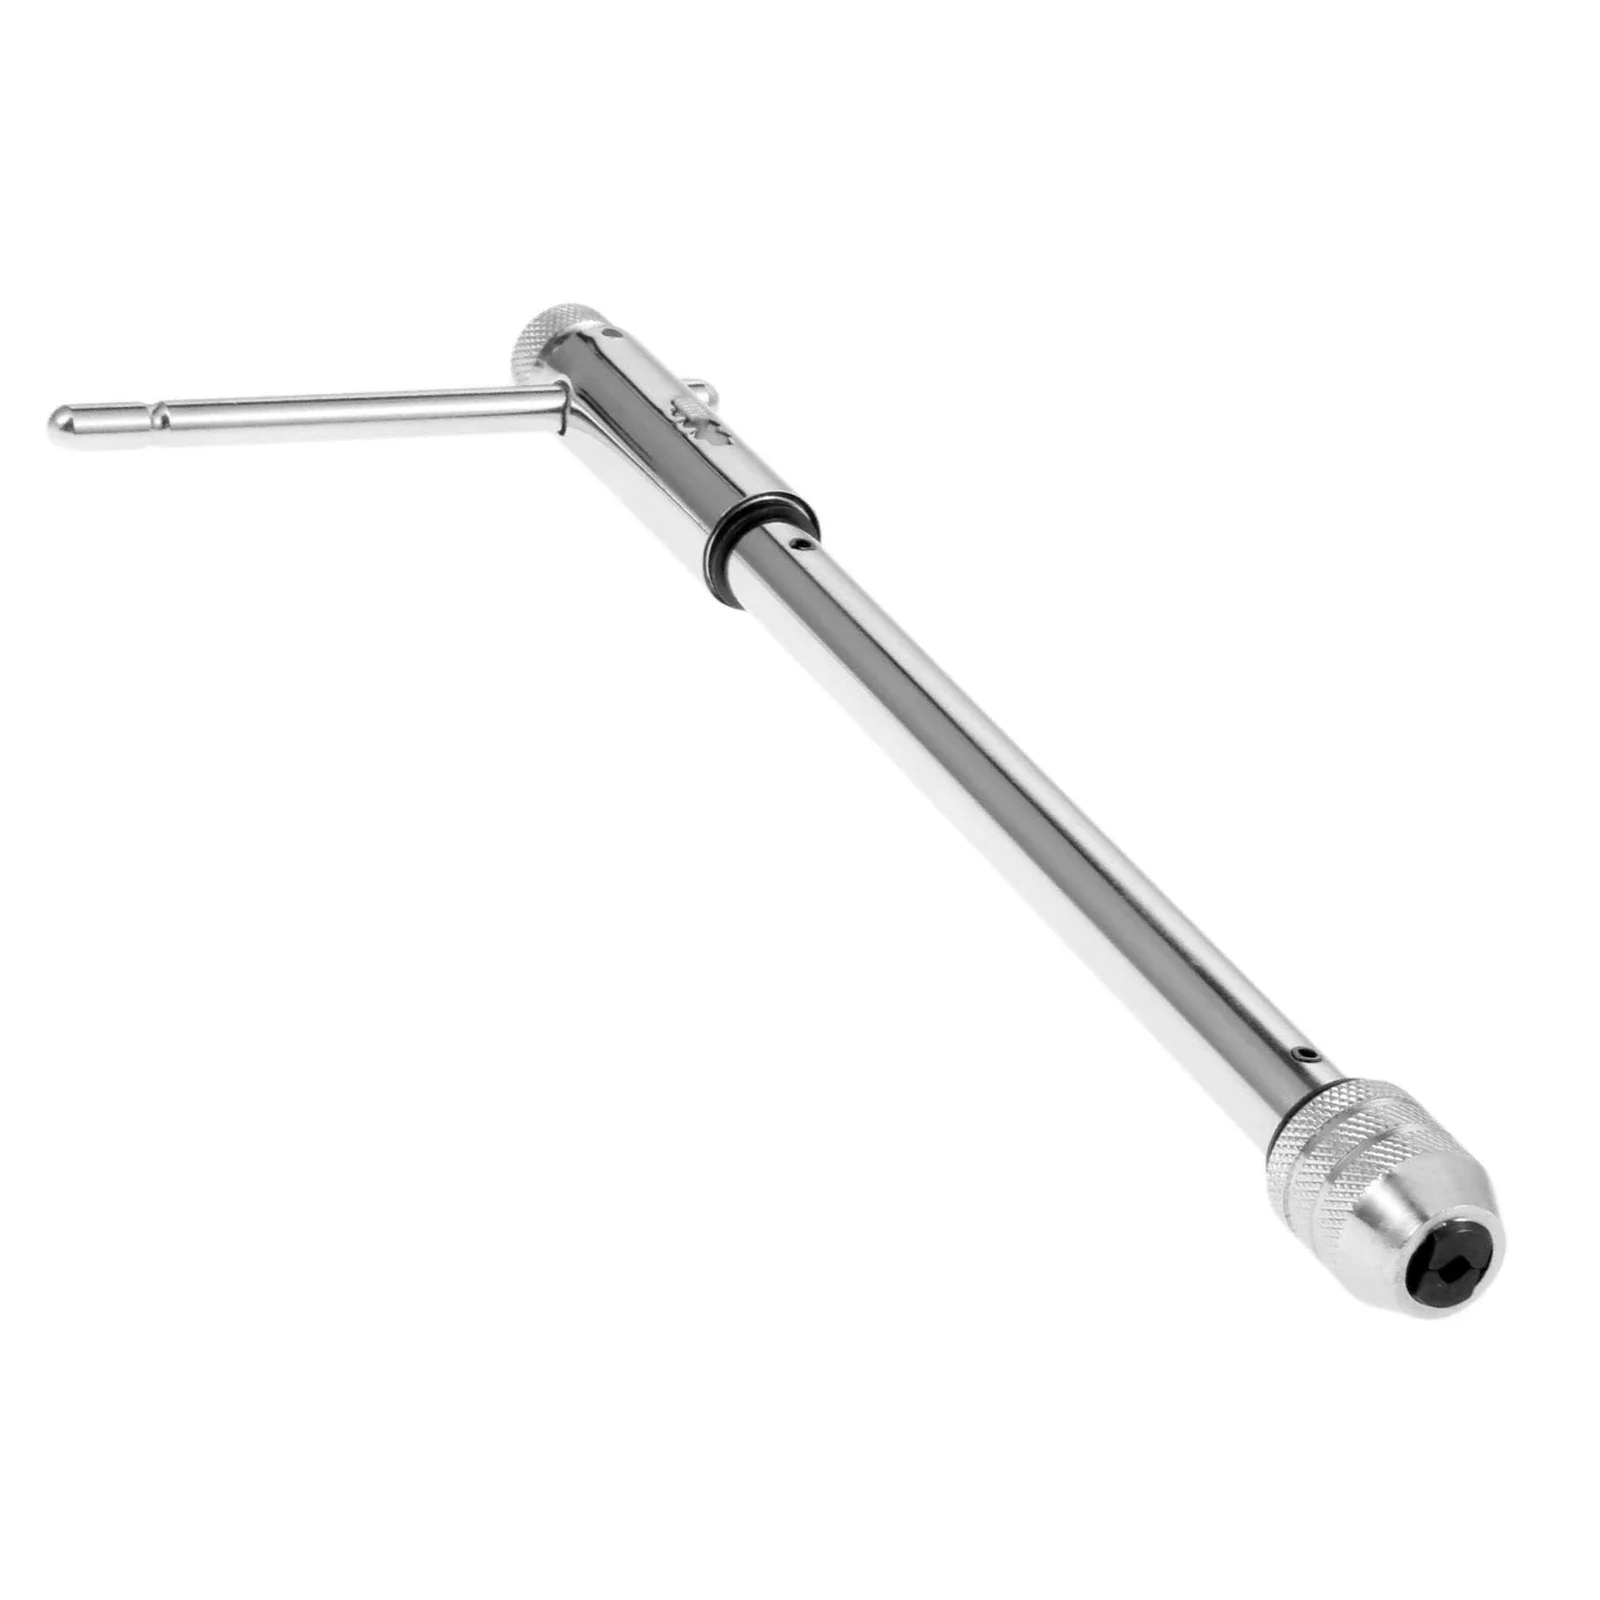 

Long Size Adjustable T-Handle Reamer Screw Extractor Tap Wrench Holder Ratchet Insert Reverse for M5-M12